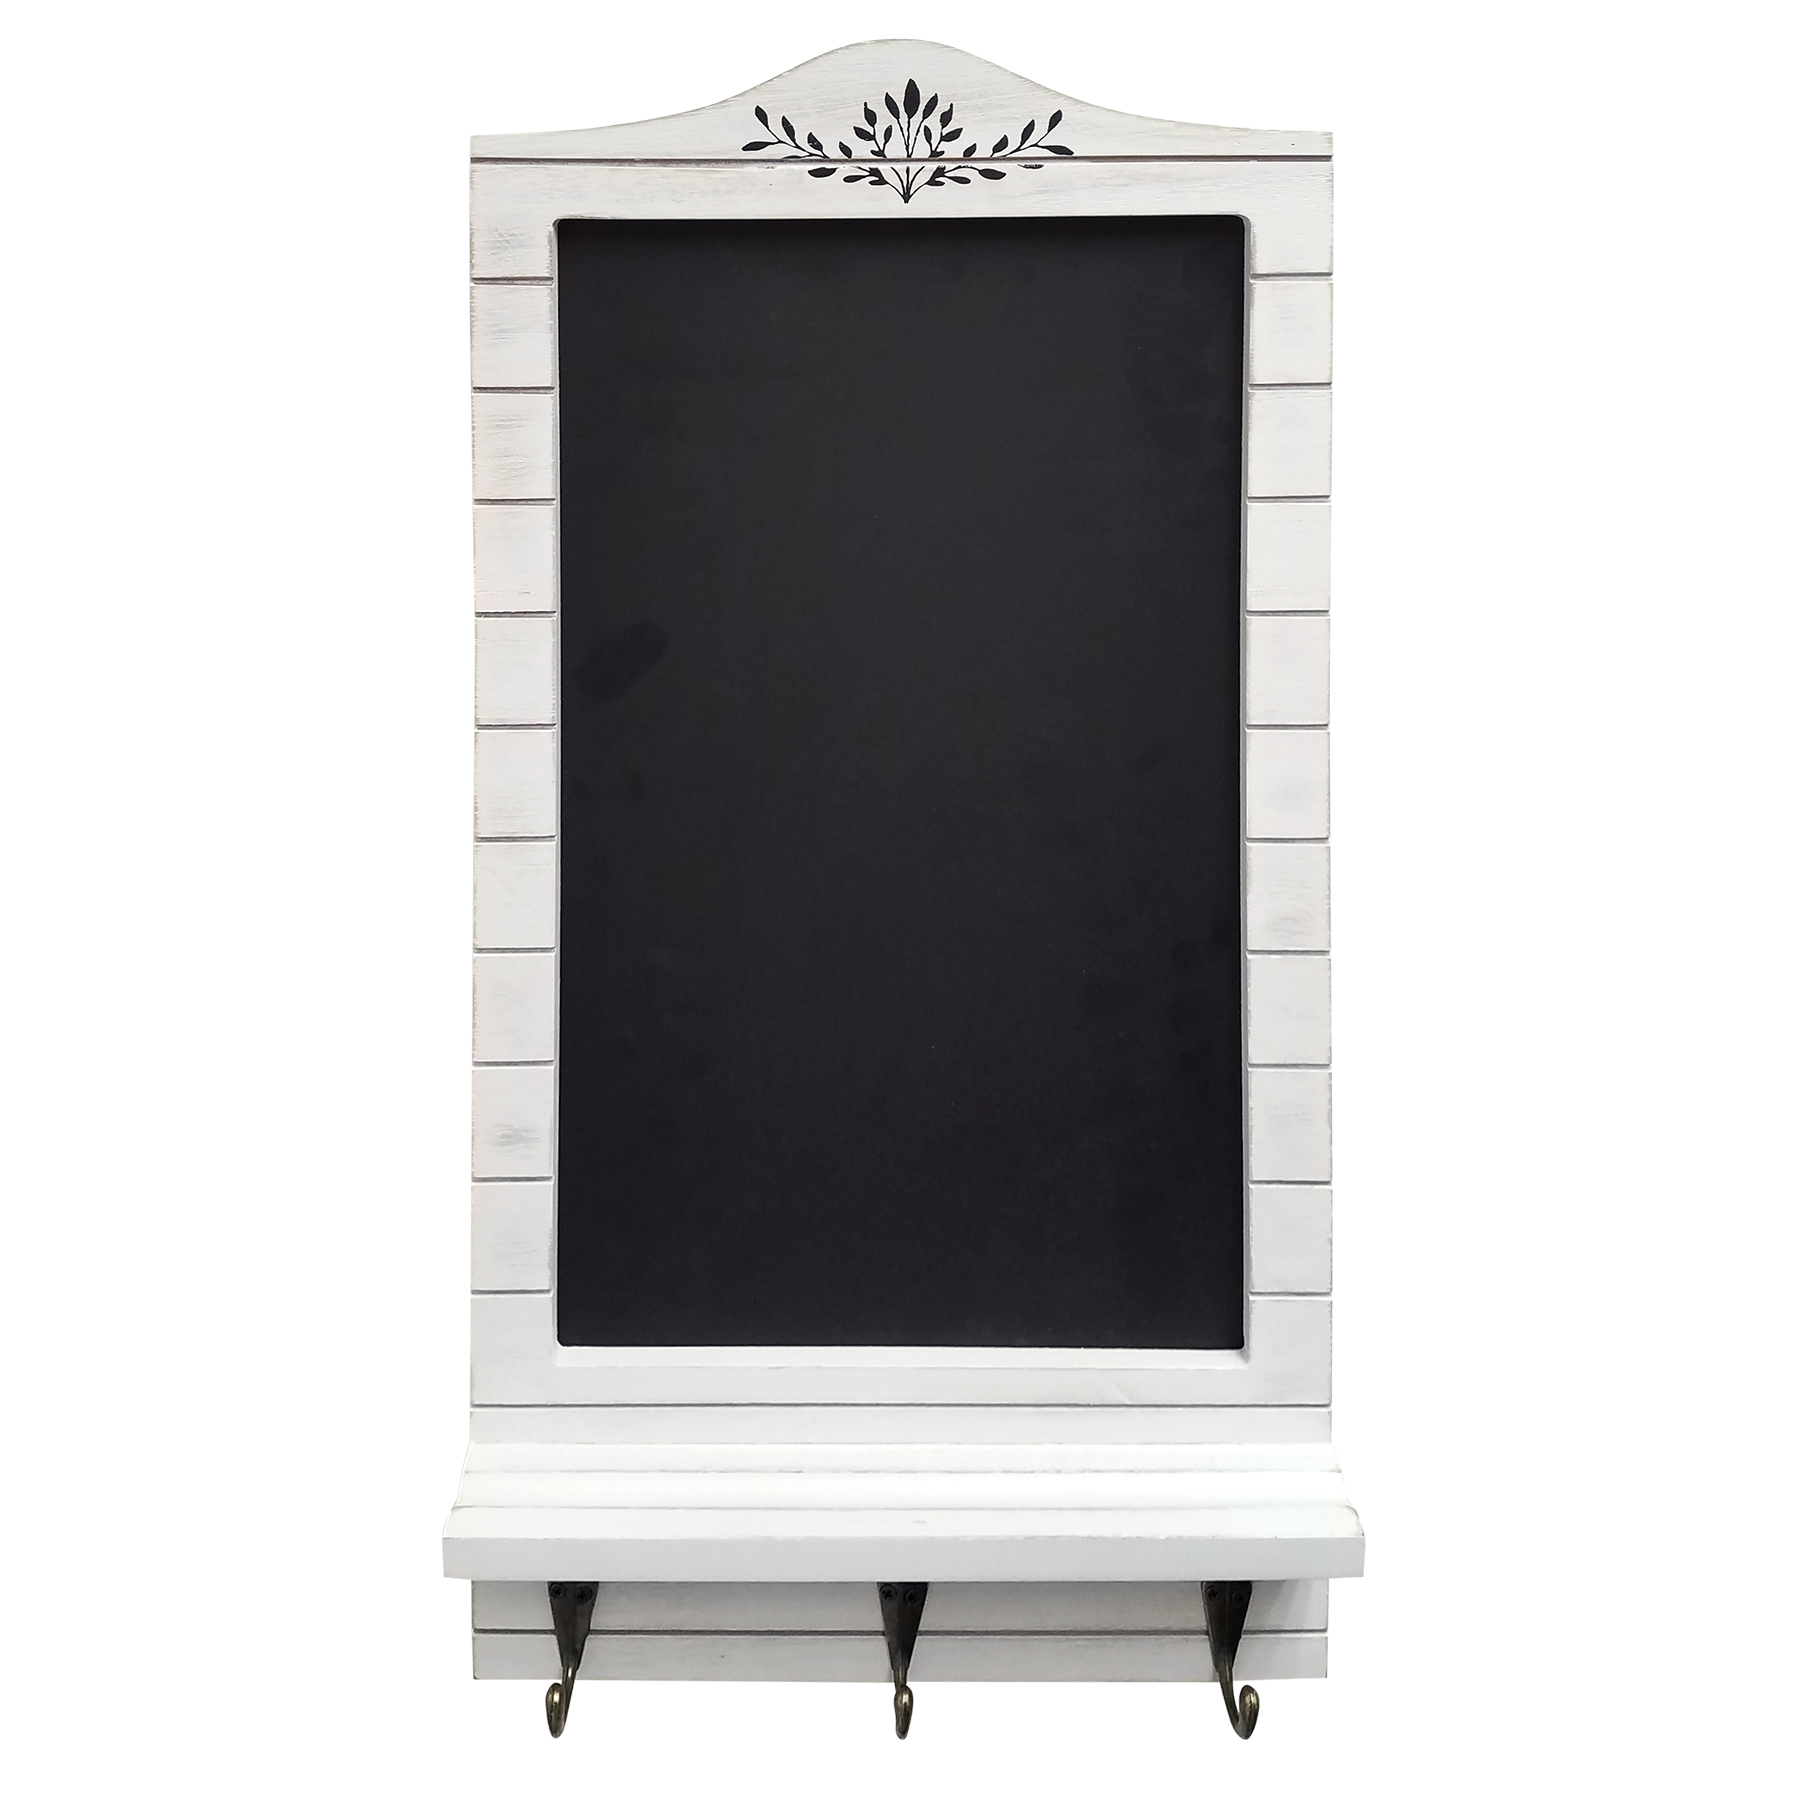 White Chalkboard with Ledge and Three Hooks, Distressed White - image 1 of 6